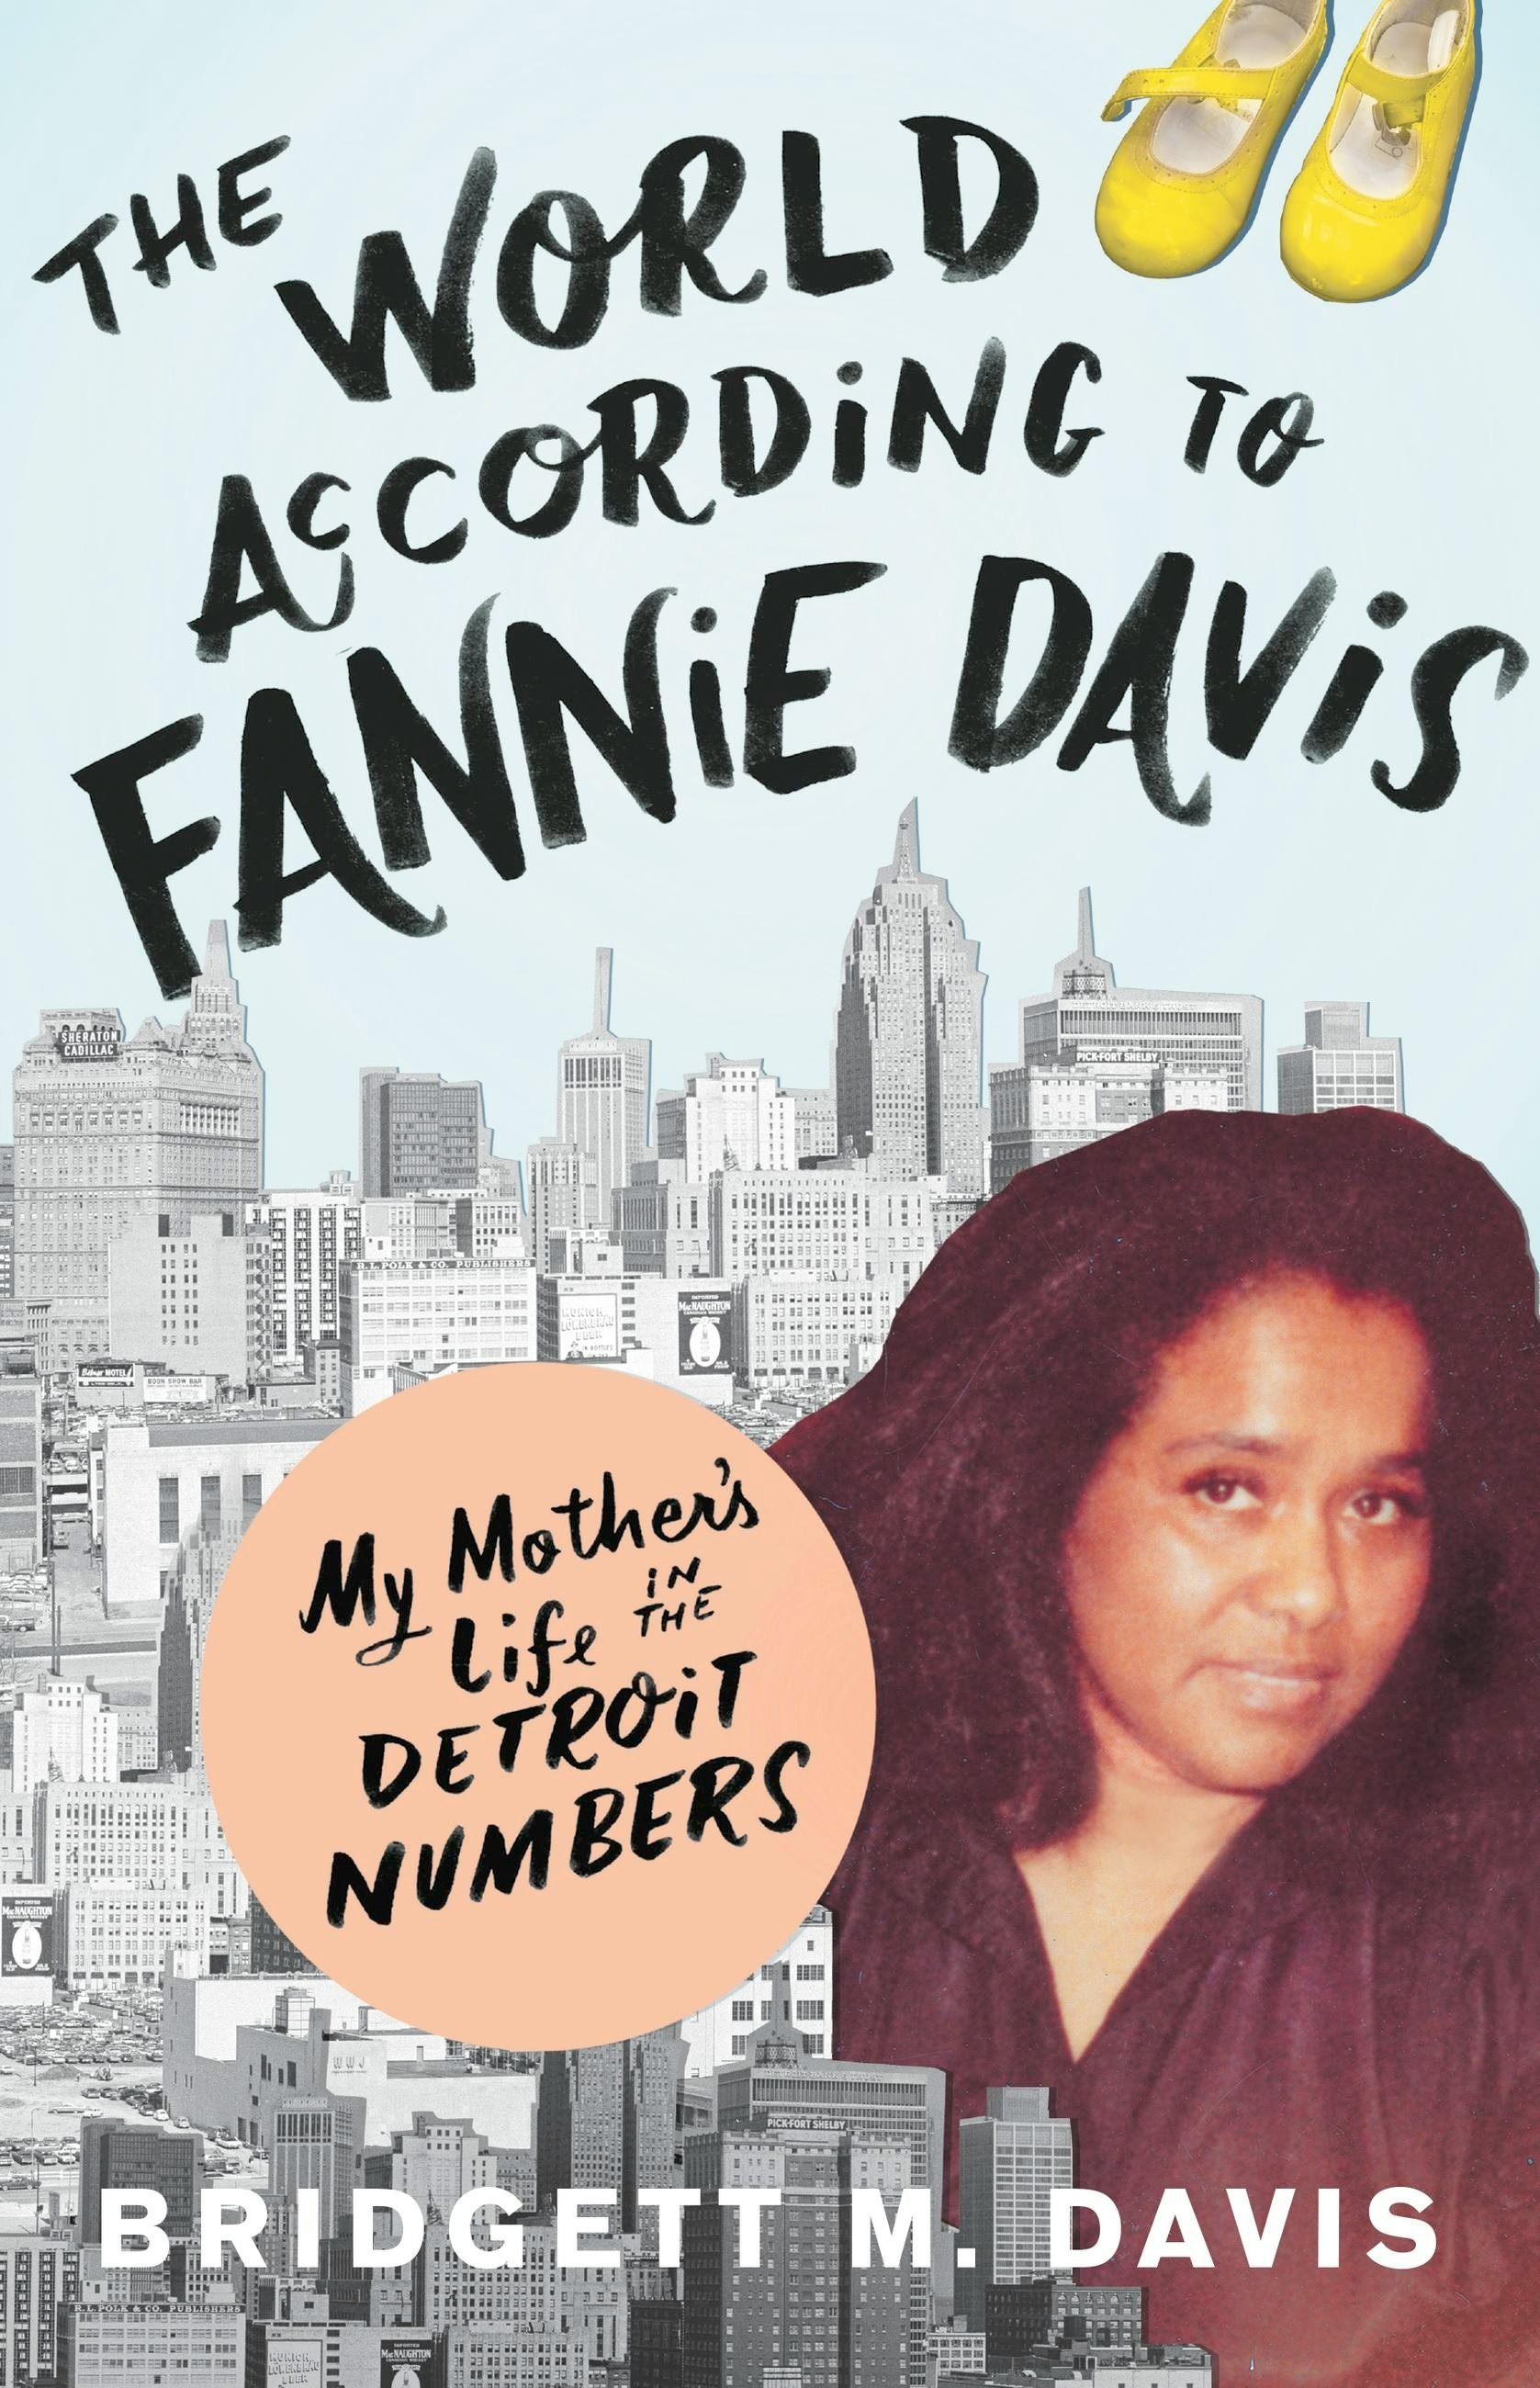 the world according to fannie davis sparknotes